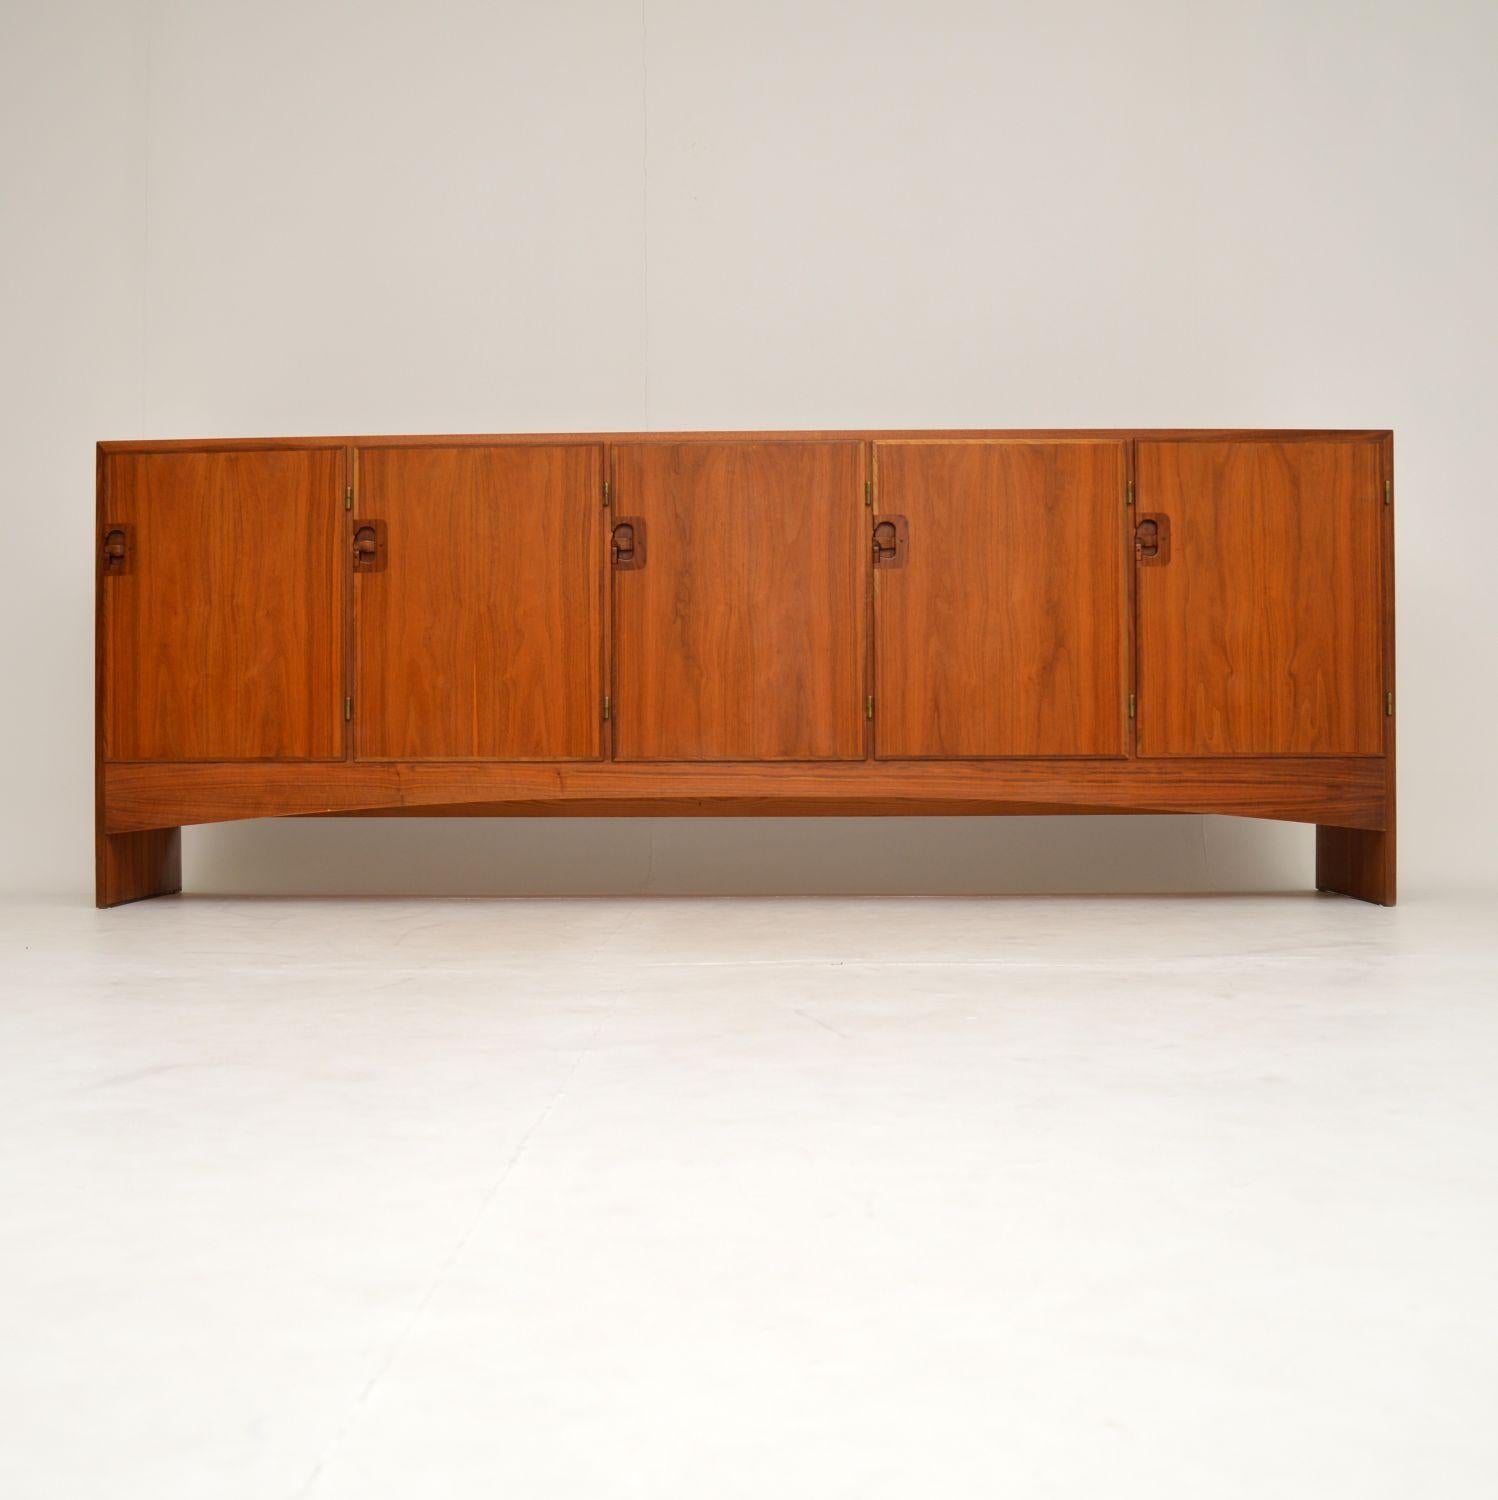 A stunning and very impressive vintage Danish sideboard in teak. This was designed by Harry Ostergaard, it was made by Randers and dates from the 1960s. It has a stunning color and amazing grain patterns, it looks like it never saw the light of day